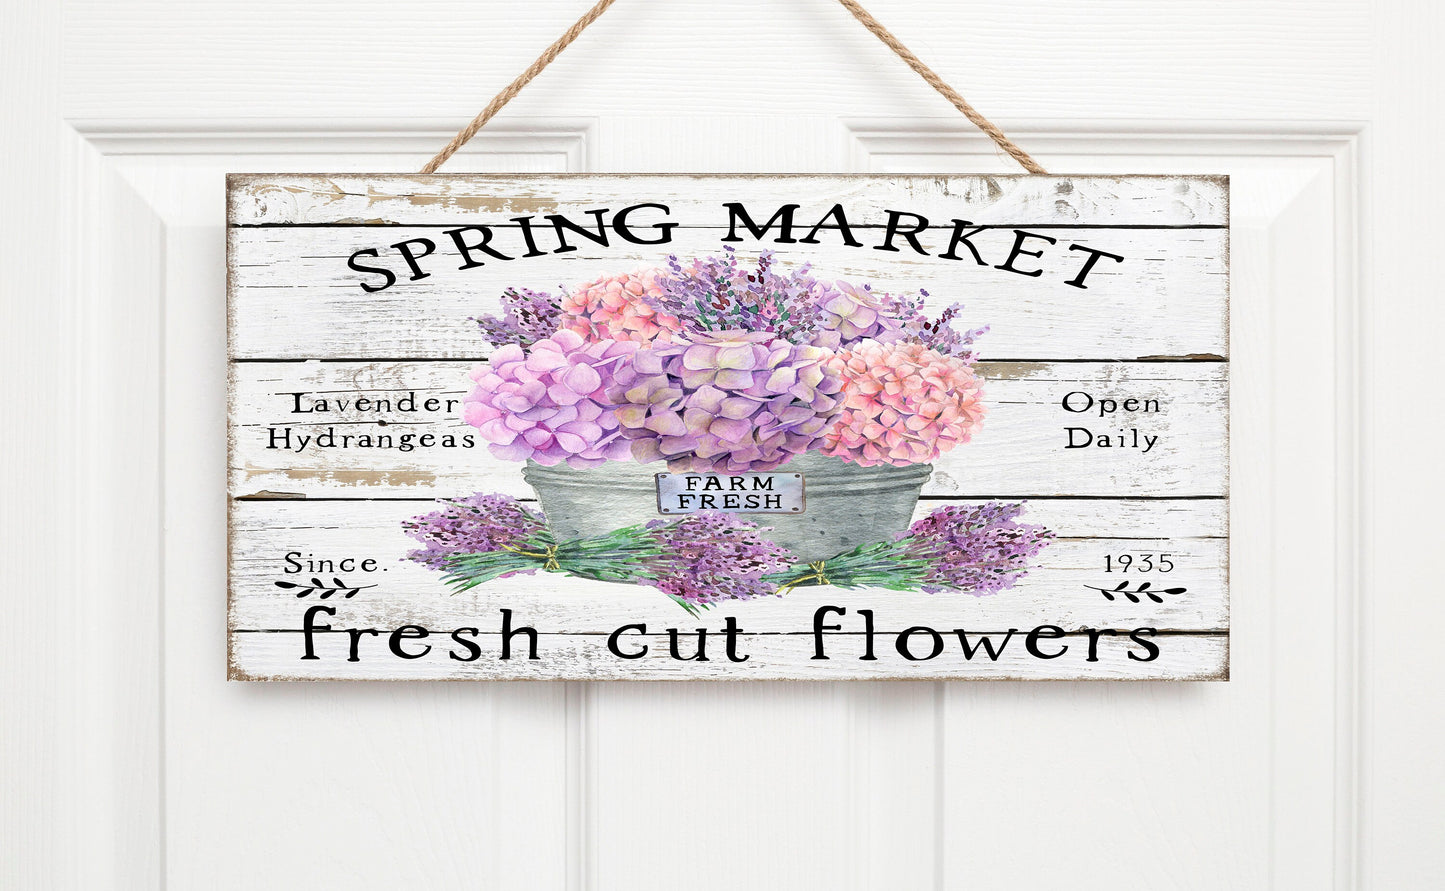 The Lavender and Hydrangea Spring Market Handmade Wood Sign